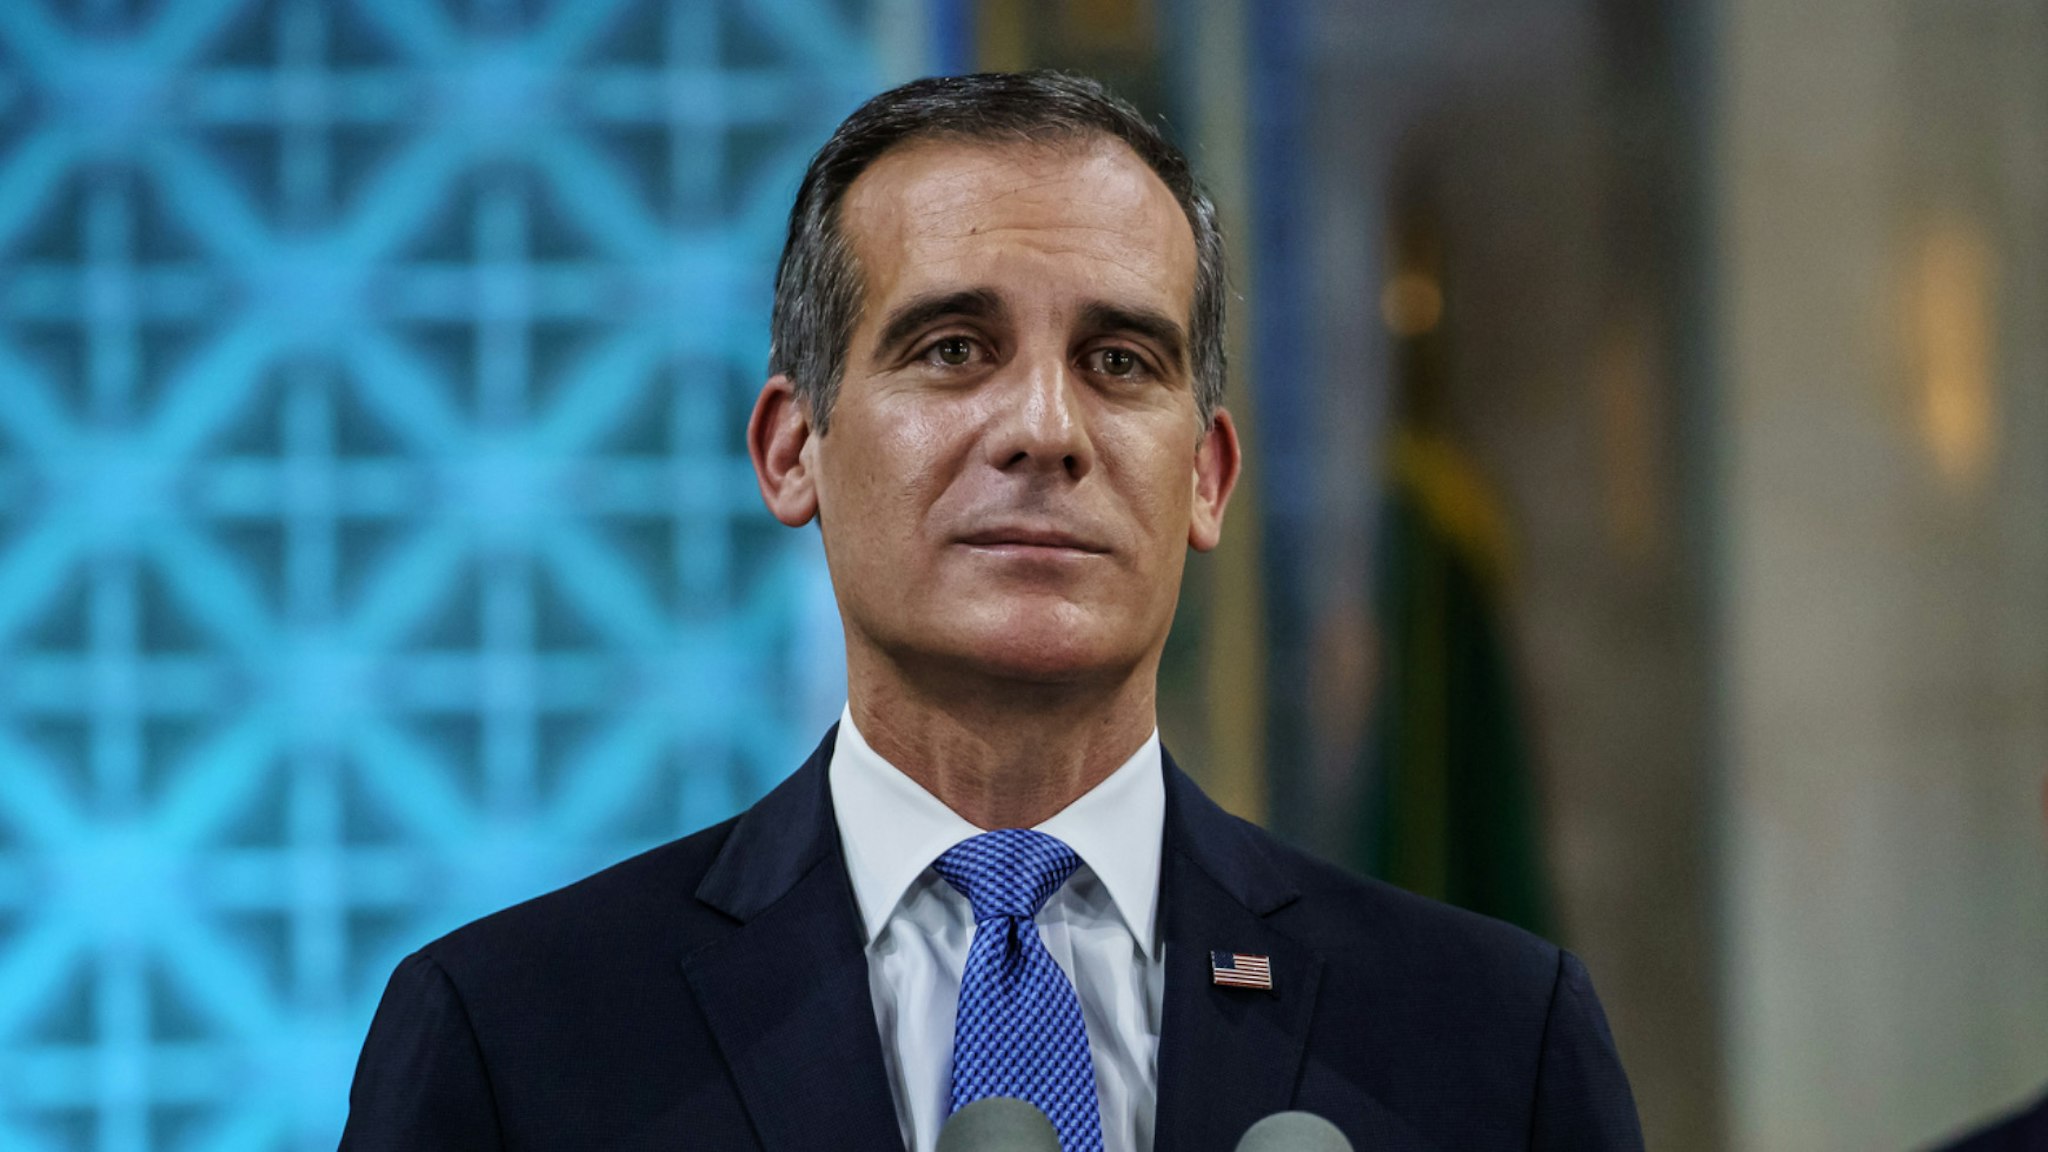 Los Angeles Mayor Eric Garcetti tears up as he gives his annual 'State of the City' speech at City Hall in Los Angeles, Calif., on April 19, 2020.